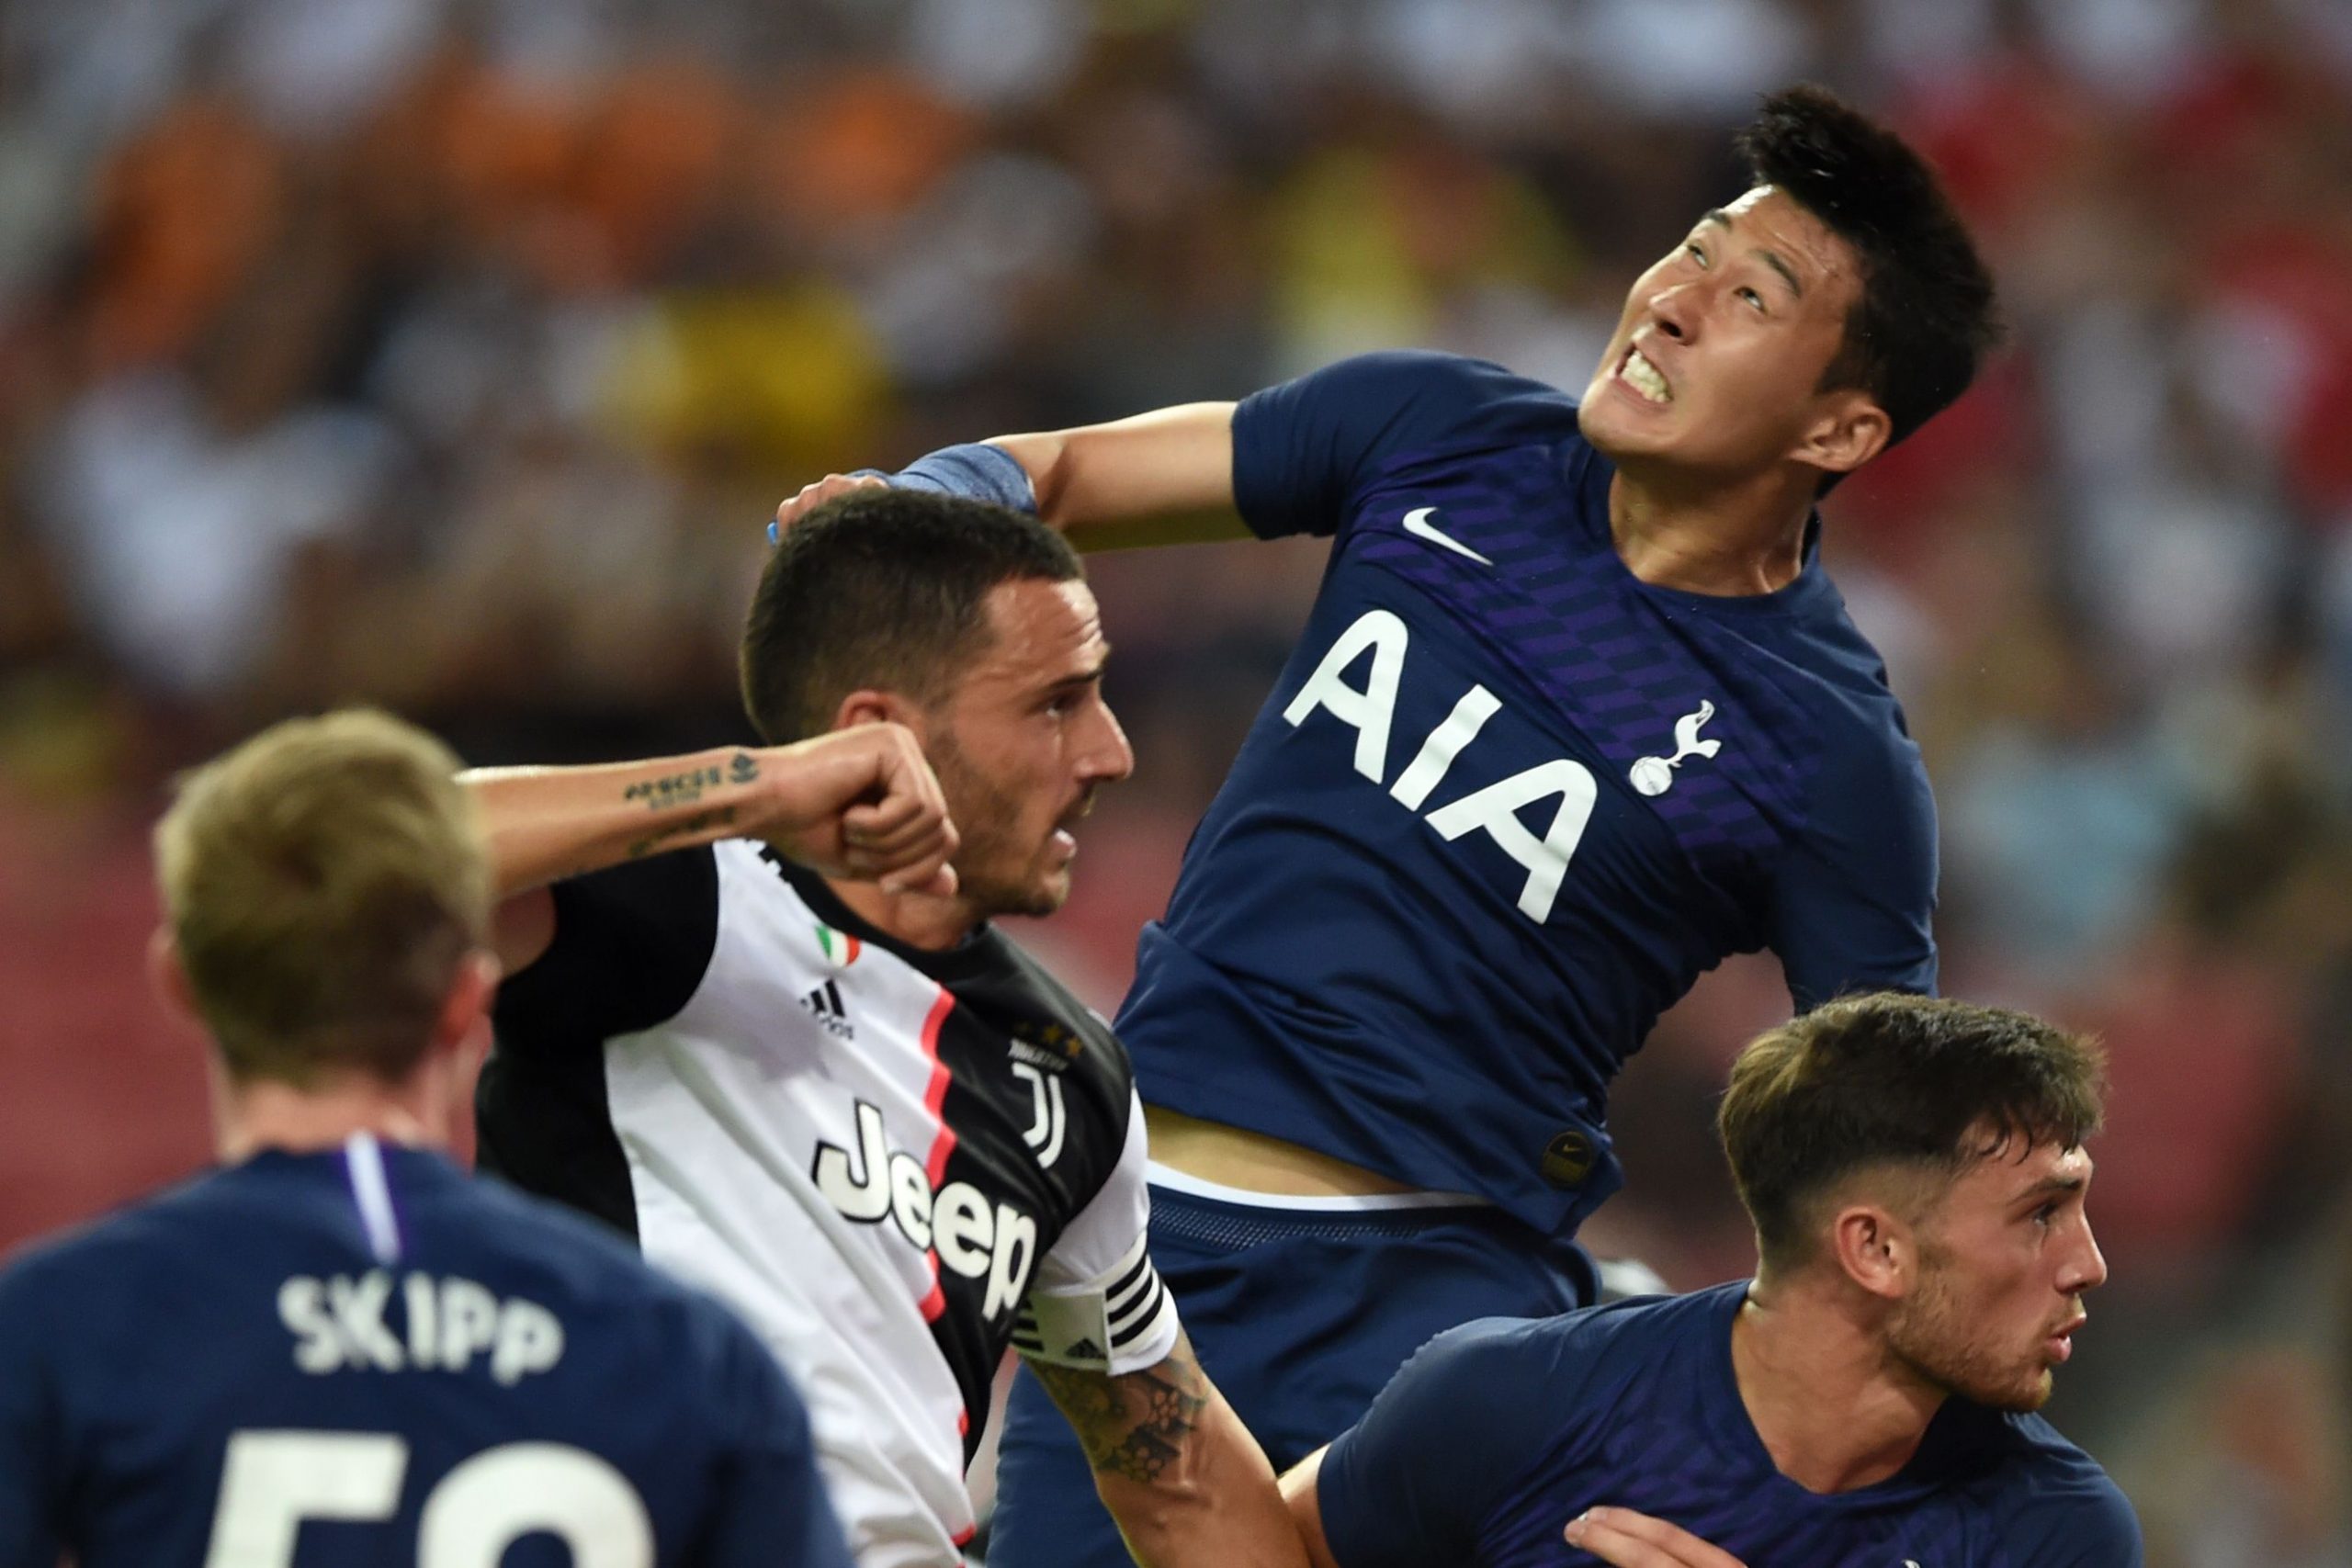 Juventus' Leonardo Bonucci contests for a header with Tottenham Hotspur's Son Heung-min during a friendly.